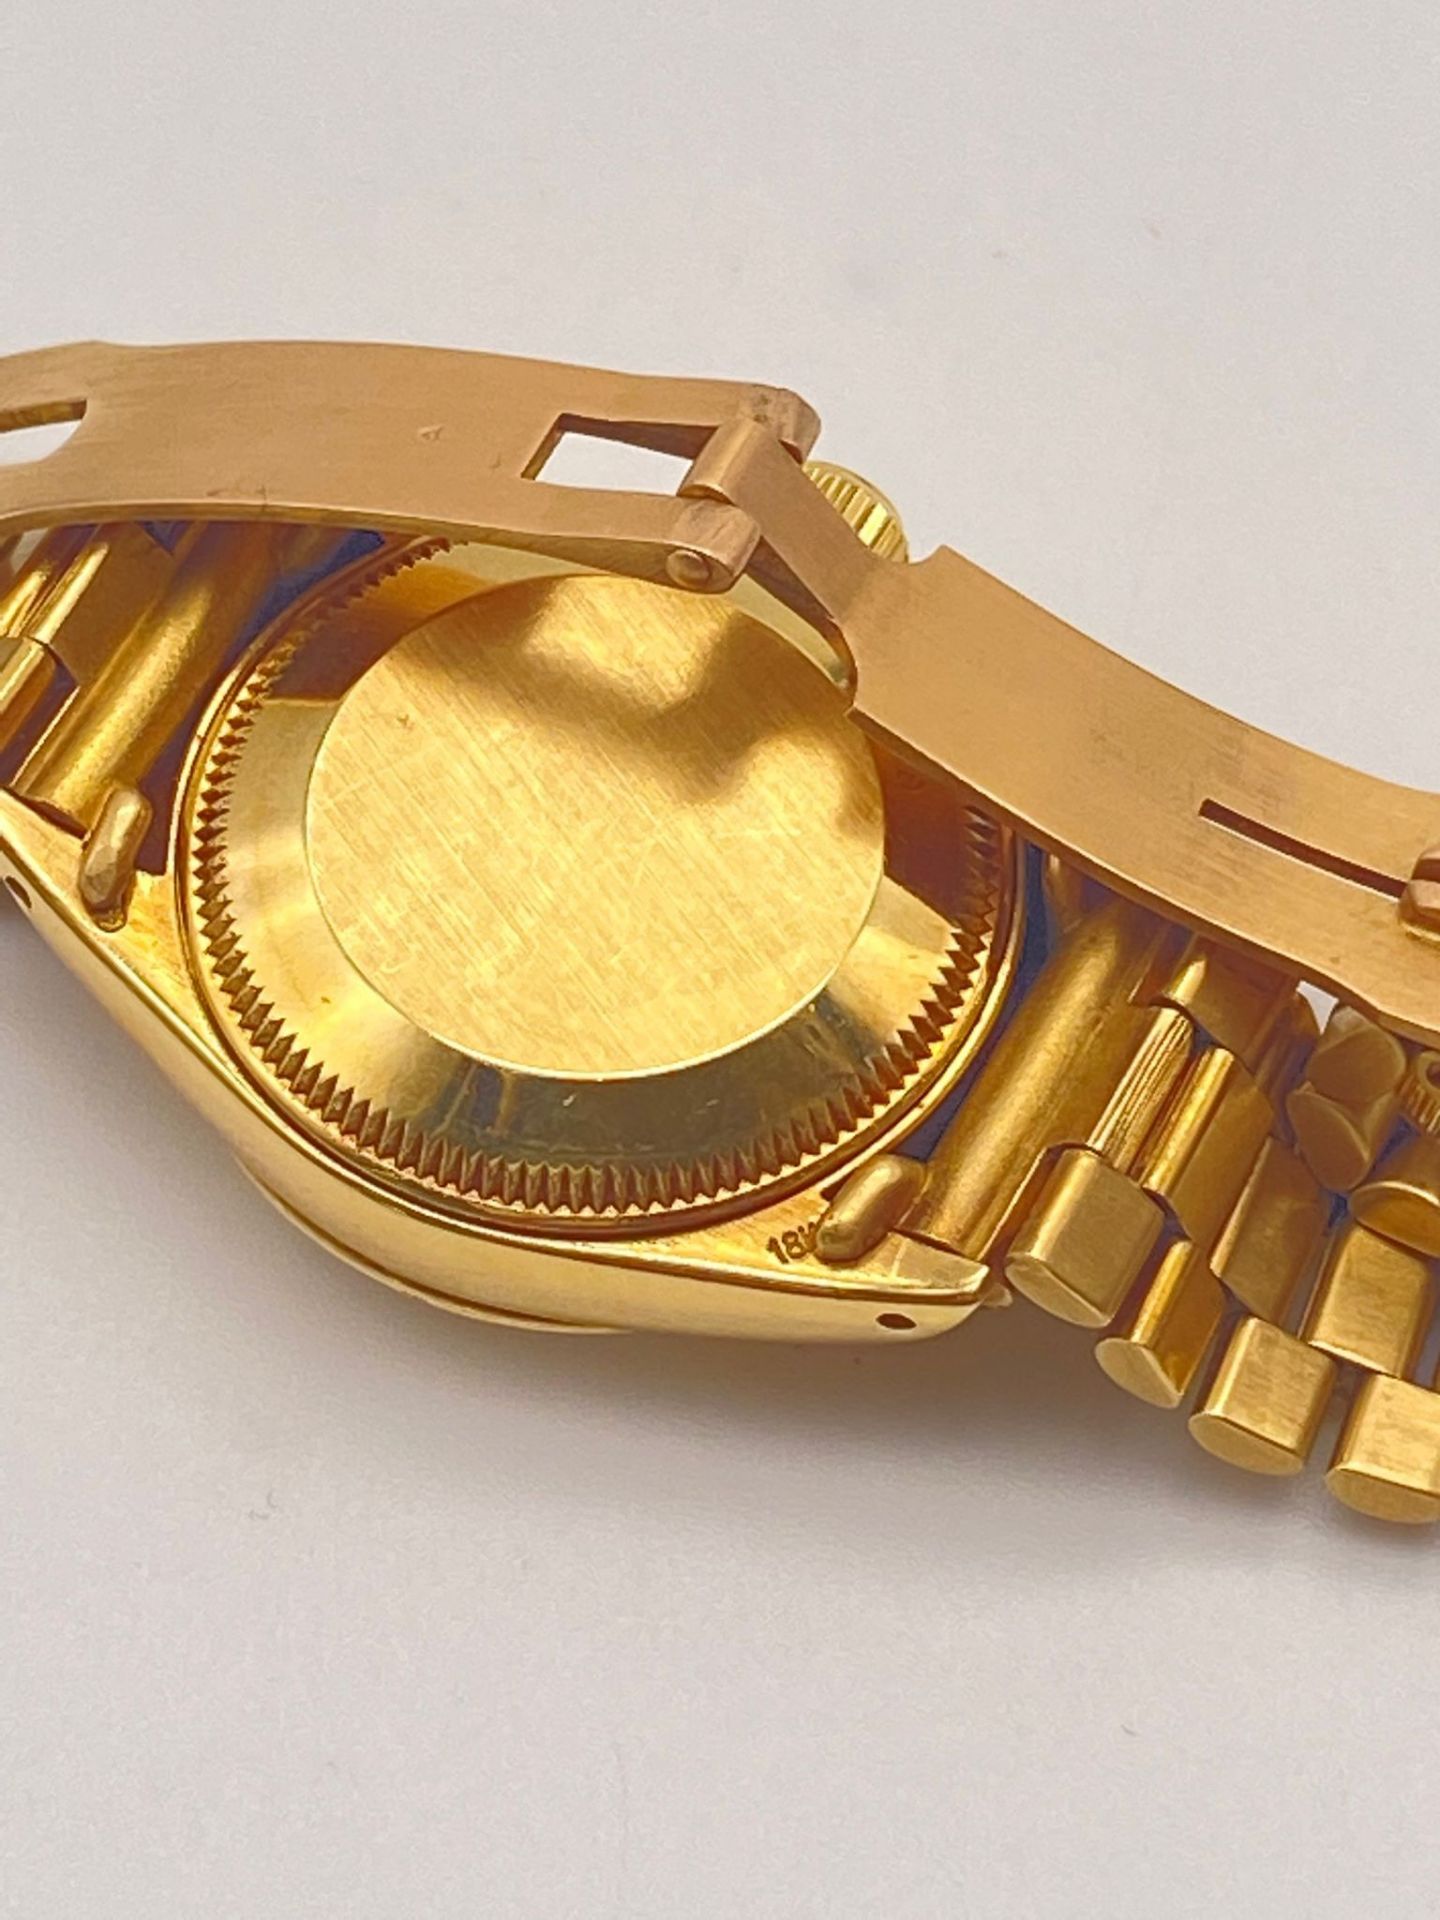 A 1980s Rolex Oyster Perpetual 18K Solid Gold and Diamond Datejust Ladies Watch - with Bark-Effect - Image 3 of 7